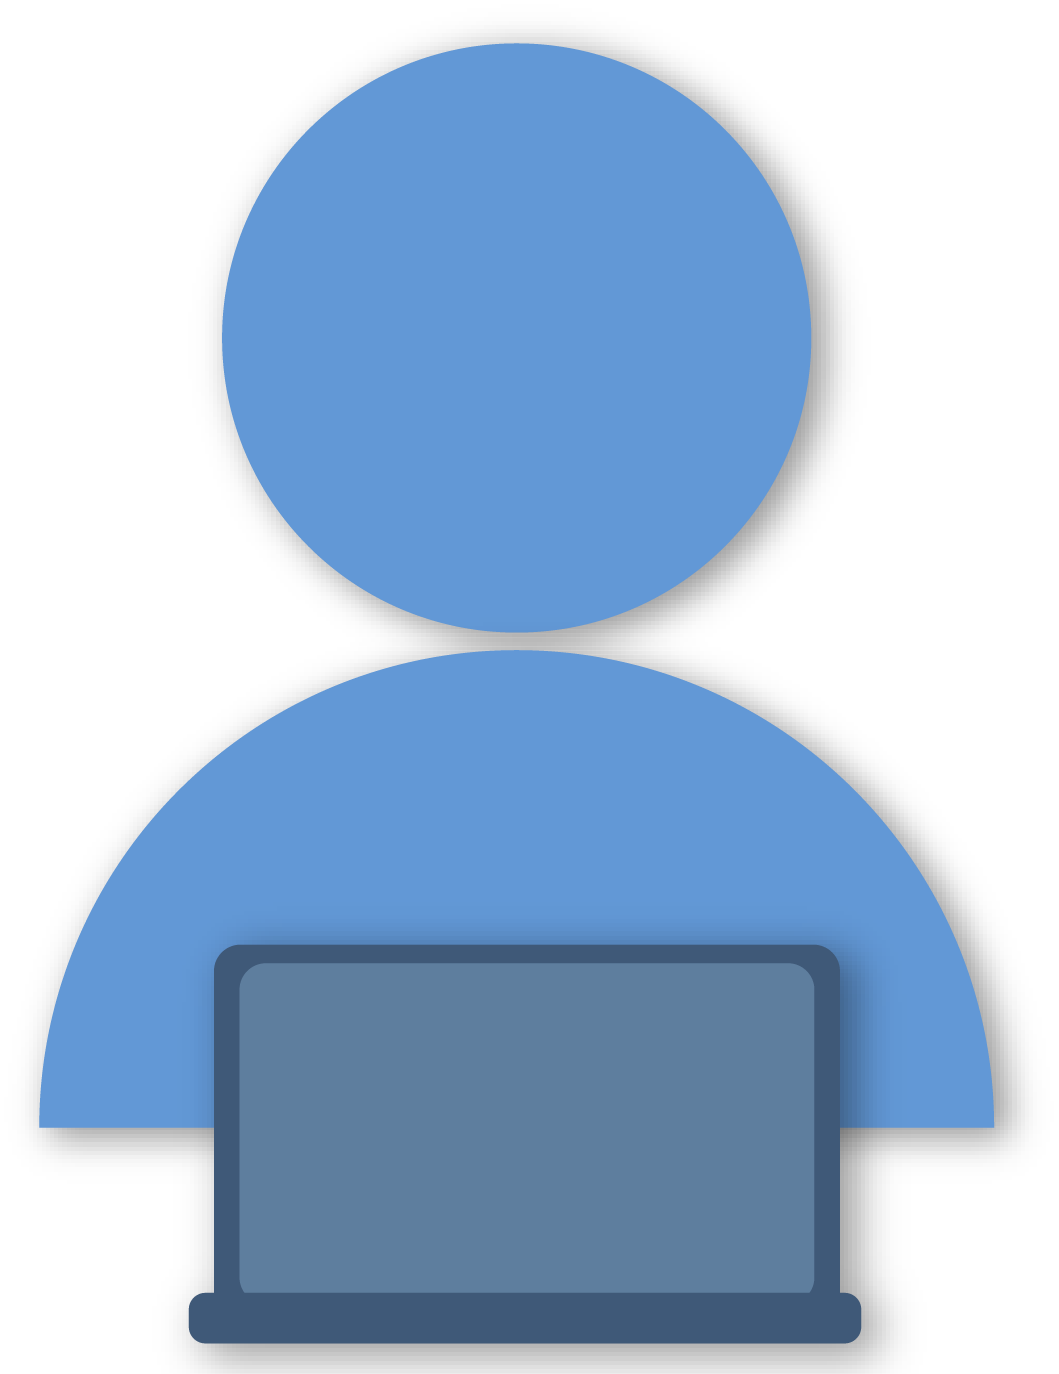 Image shows an icon of a person in royal blue. In front of the icon is a dark blue laptop representing the user's devices.